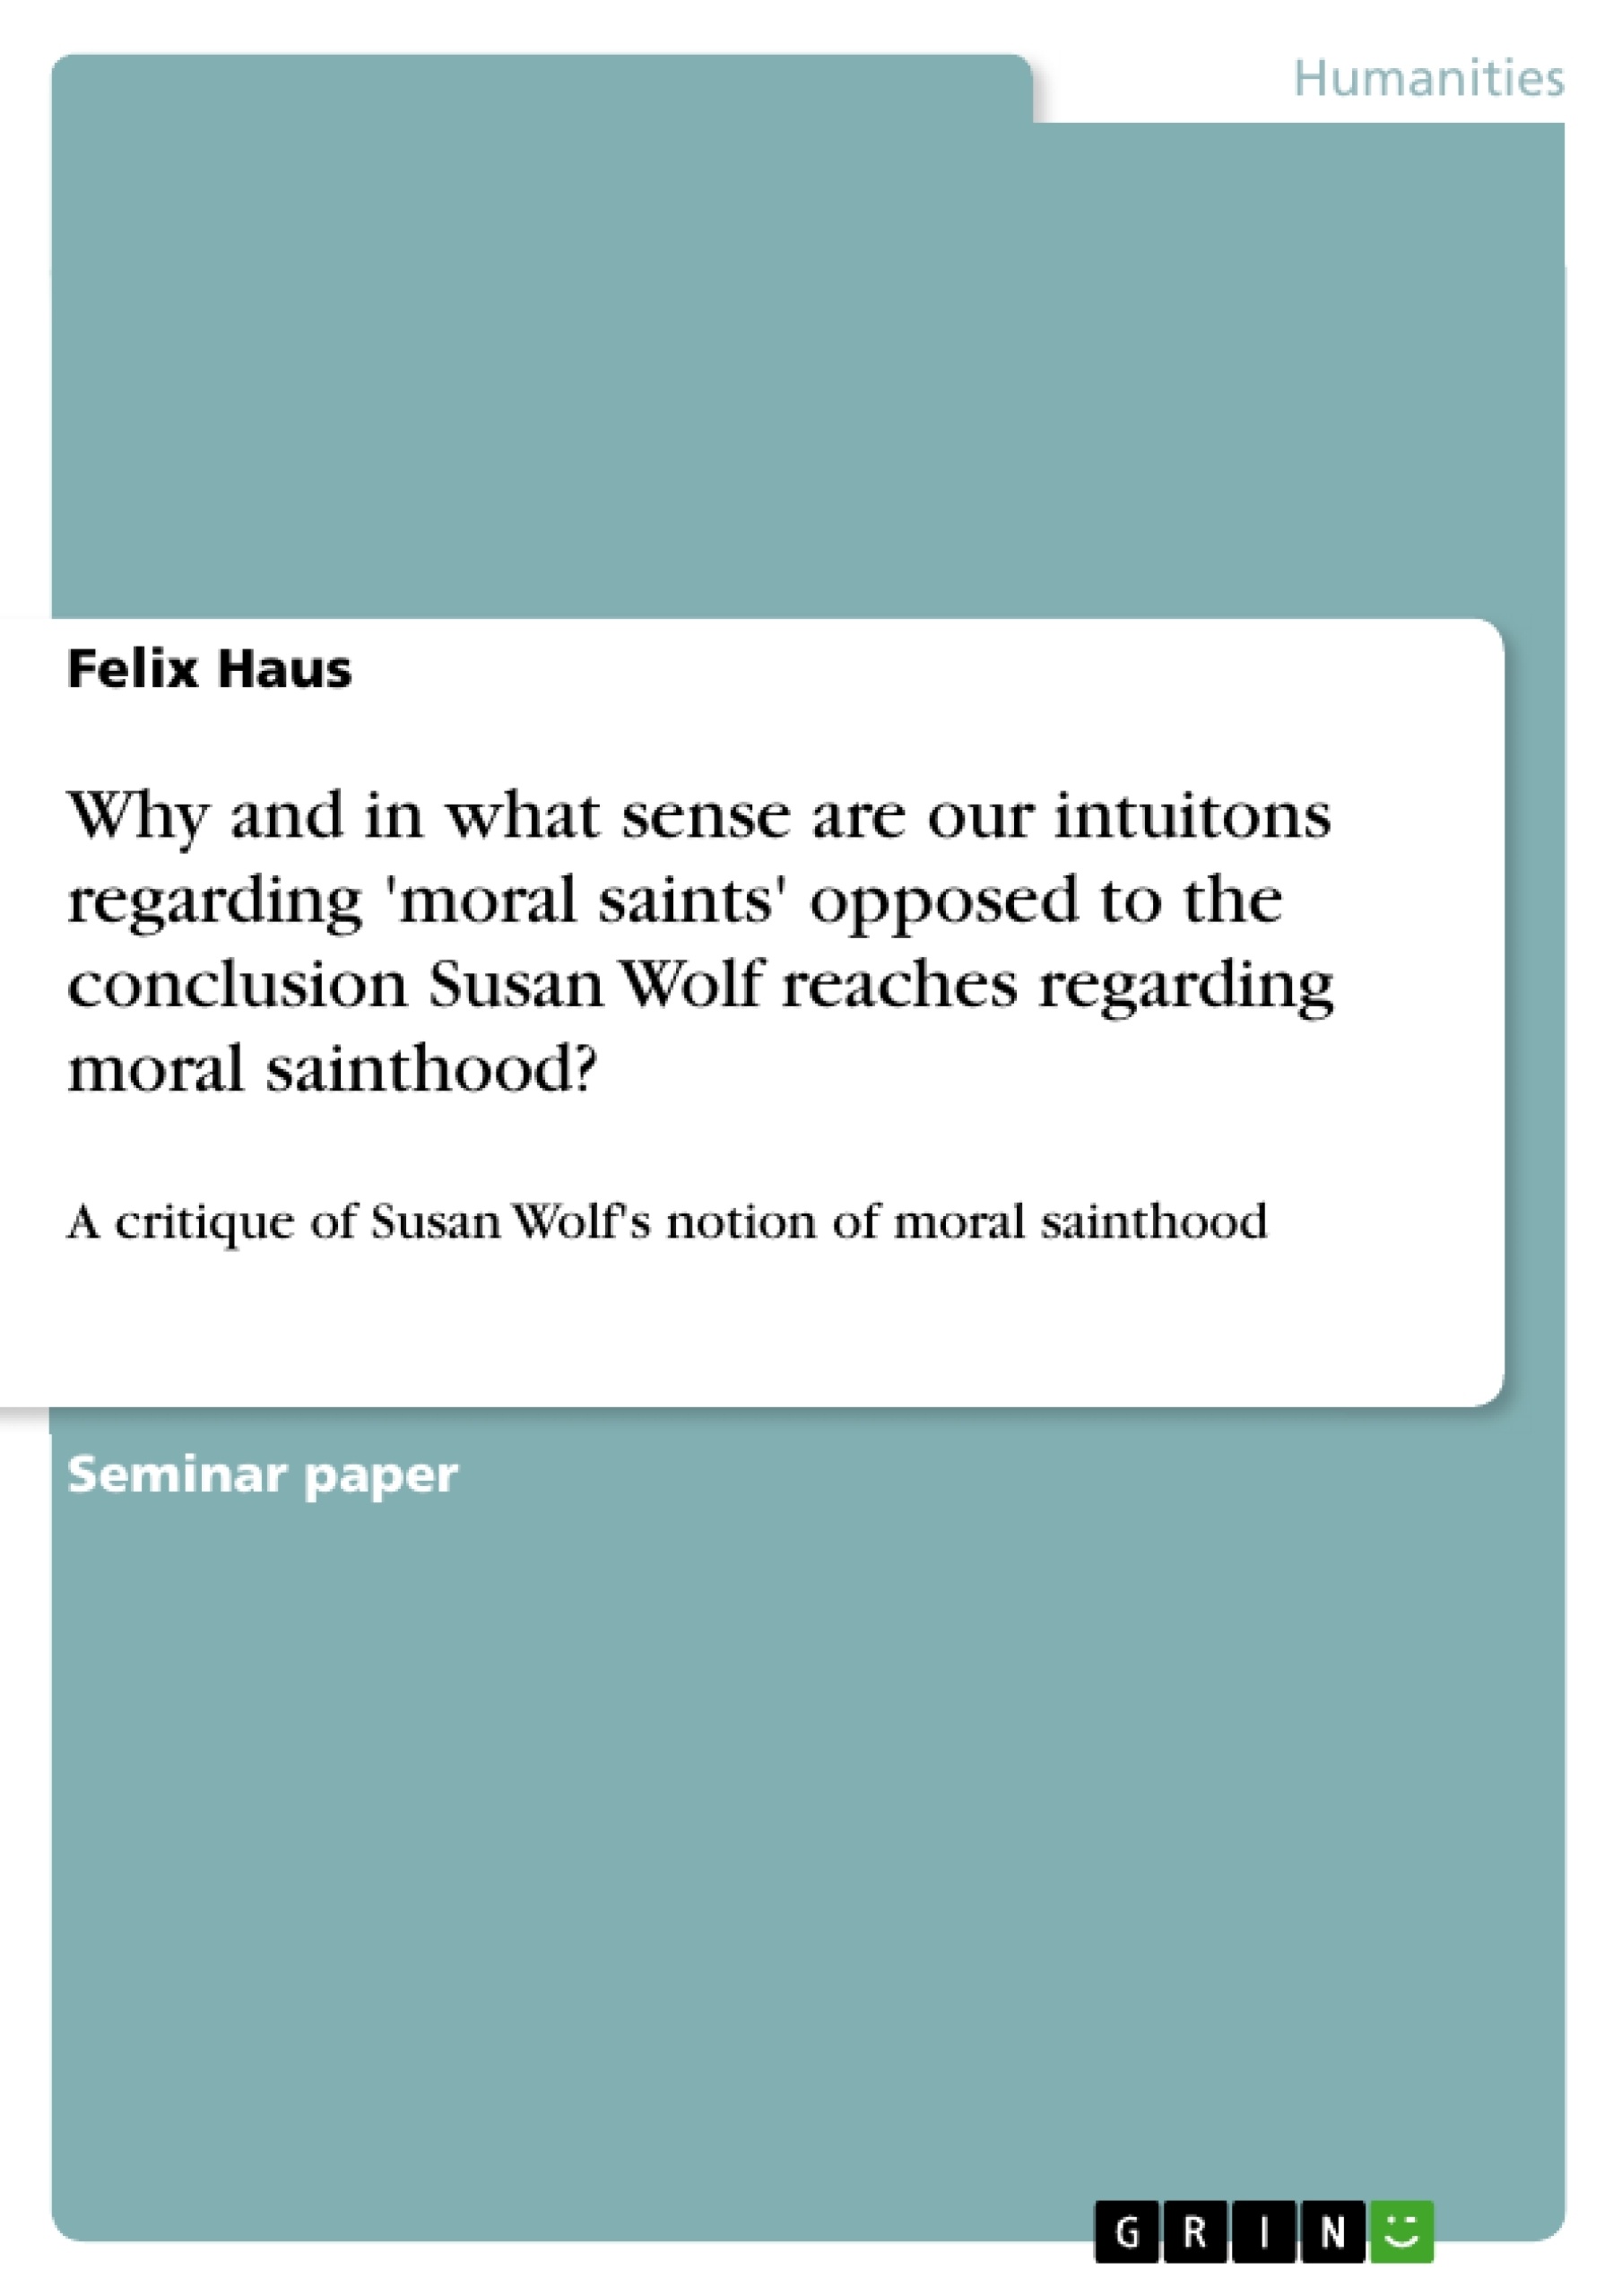 Título: Why and in what sense are our intuitons regarding 'moral saints' opposed to the conclusion Susan Wolf reaches regarding moral sainthood?